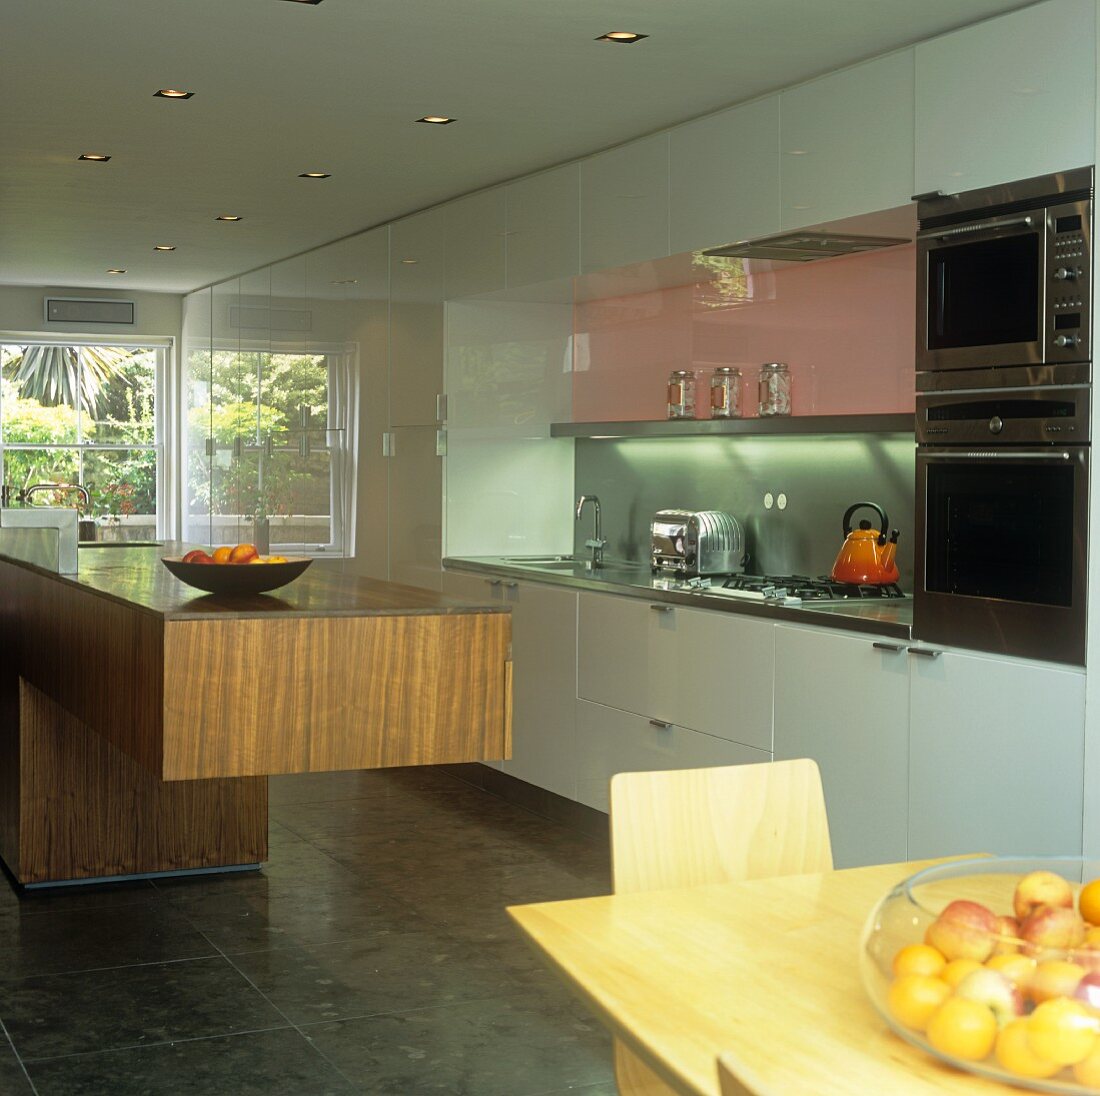 A dining area in front of a free-standing walnut kitchen counter in an open-plan kitchen with white cupboards